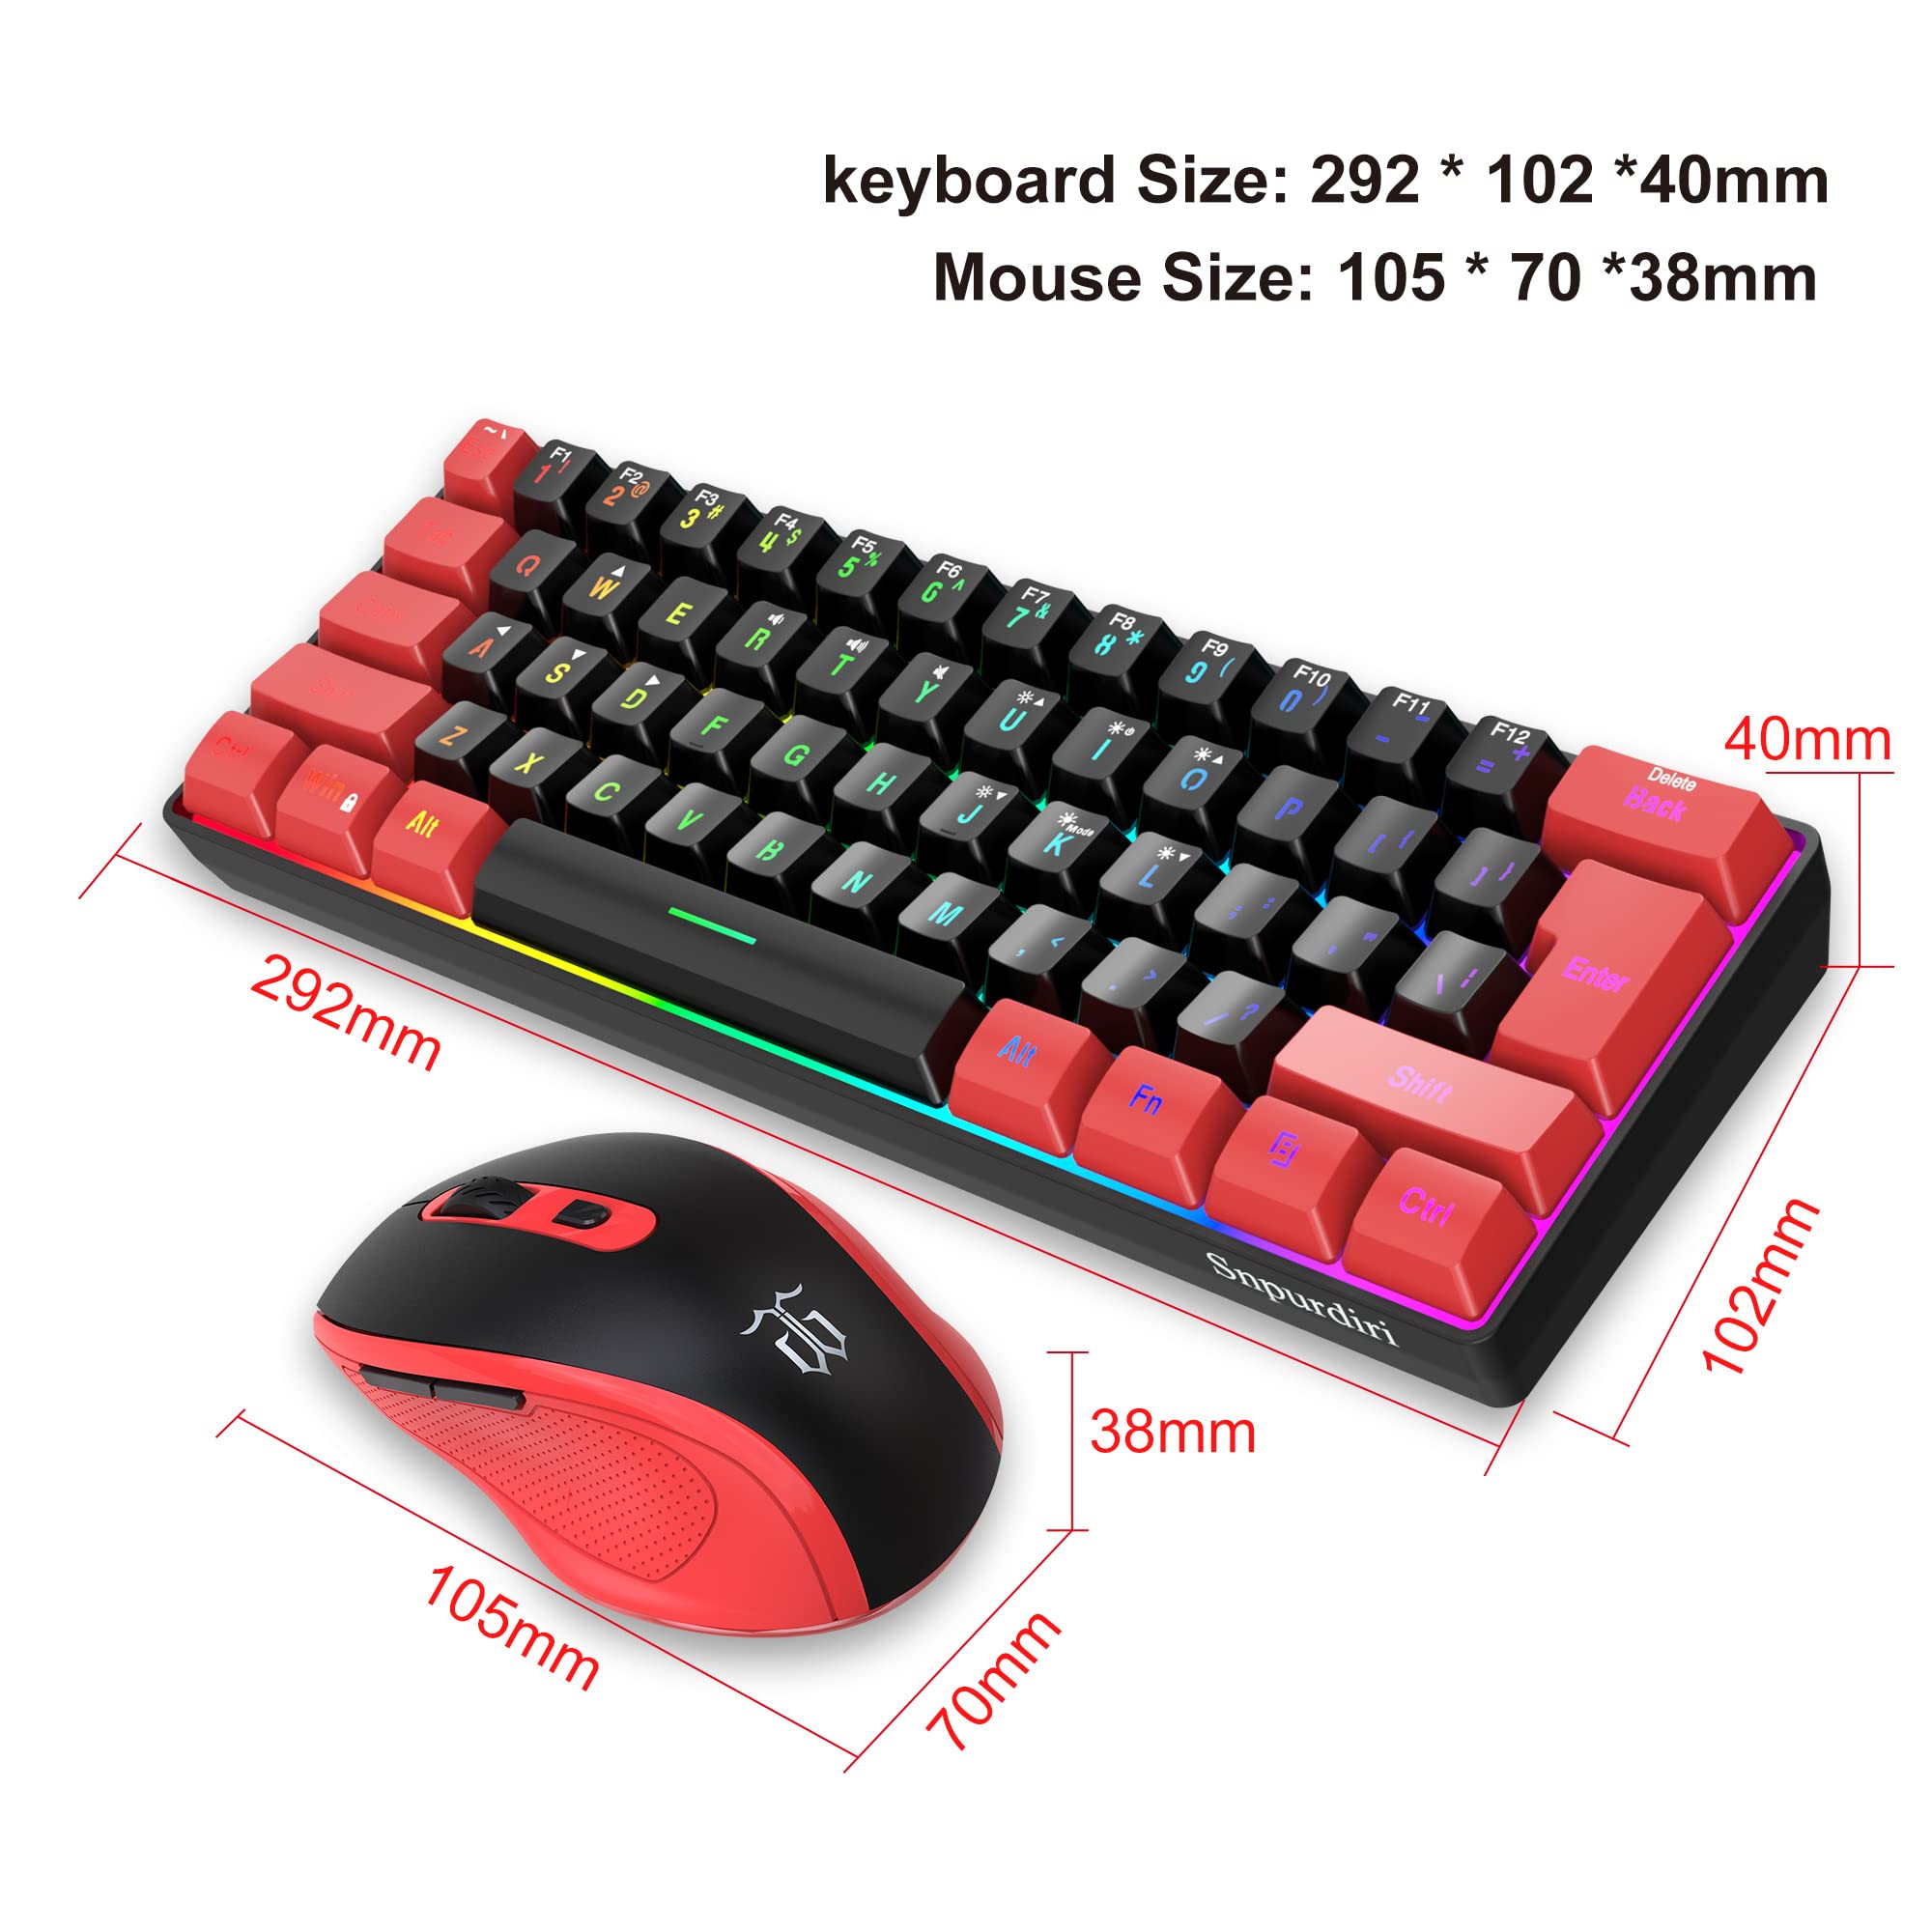 Snpurdiri 2.4G Wireless Gaming Keyboard and Mouse Combo, Include Mini 60% Merchanical Feel Keyboard, Ergonomic Vertical Feel Small Wireless Mouse(Red and Black)